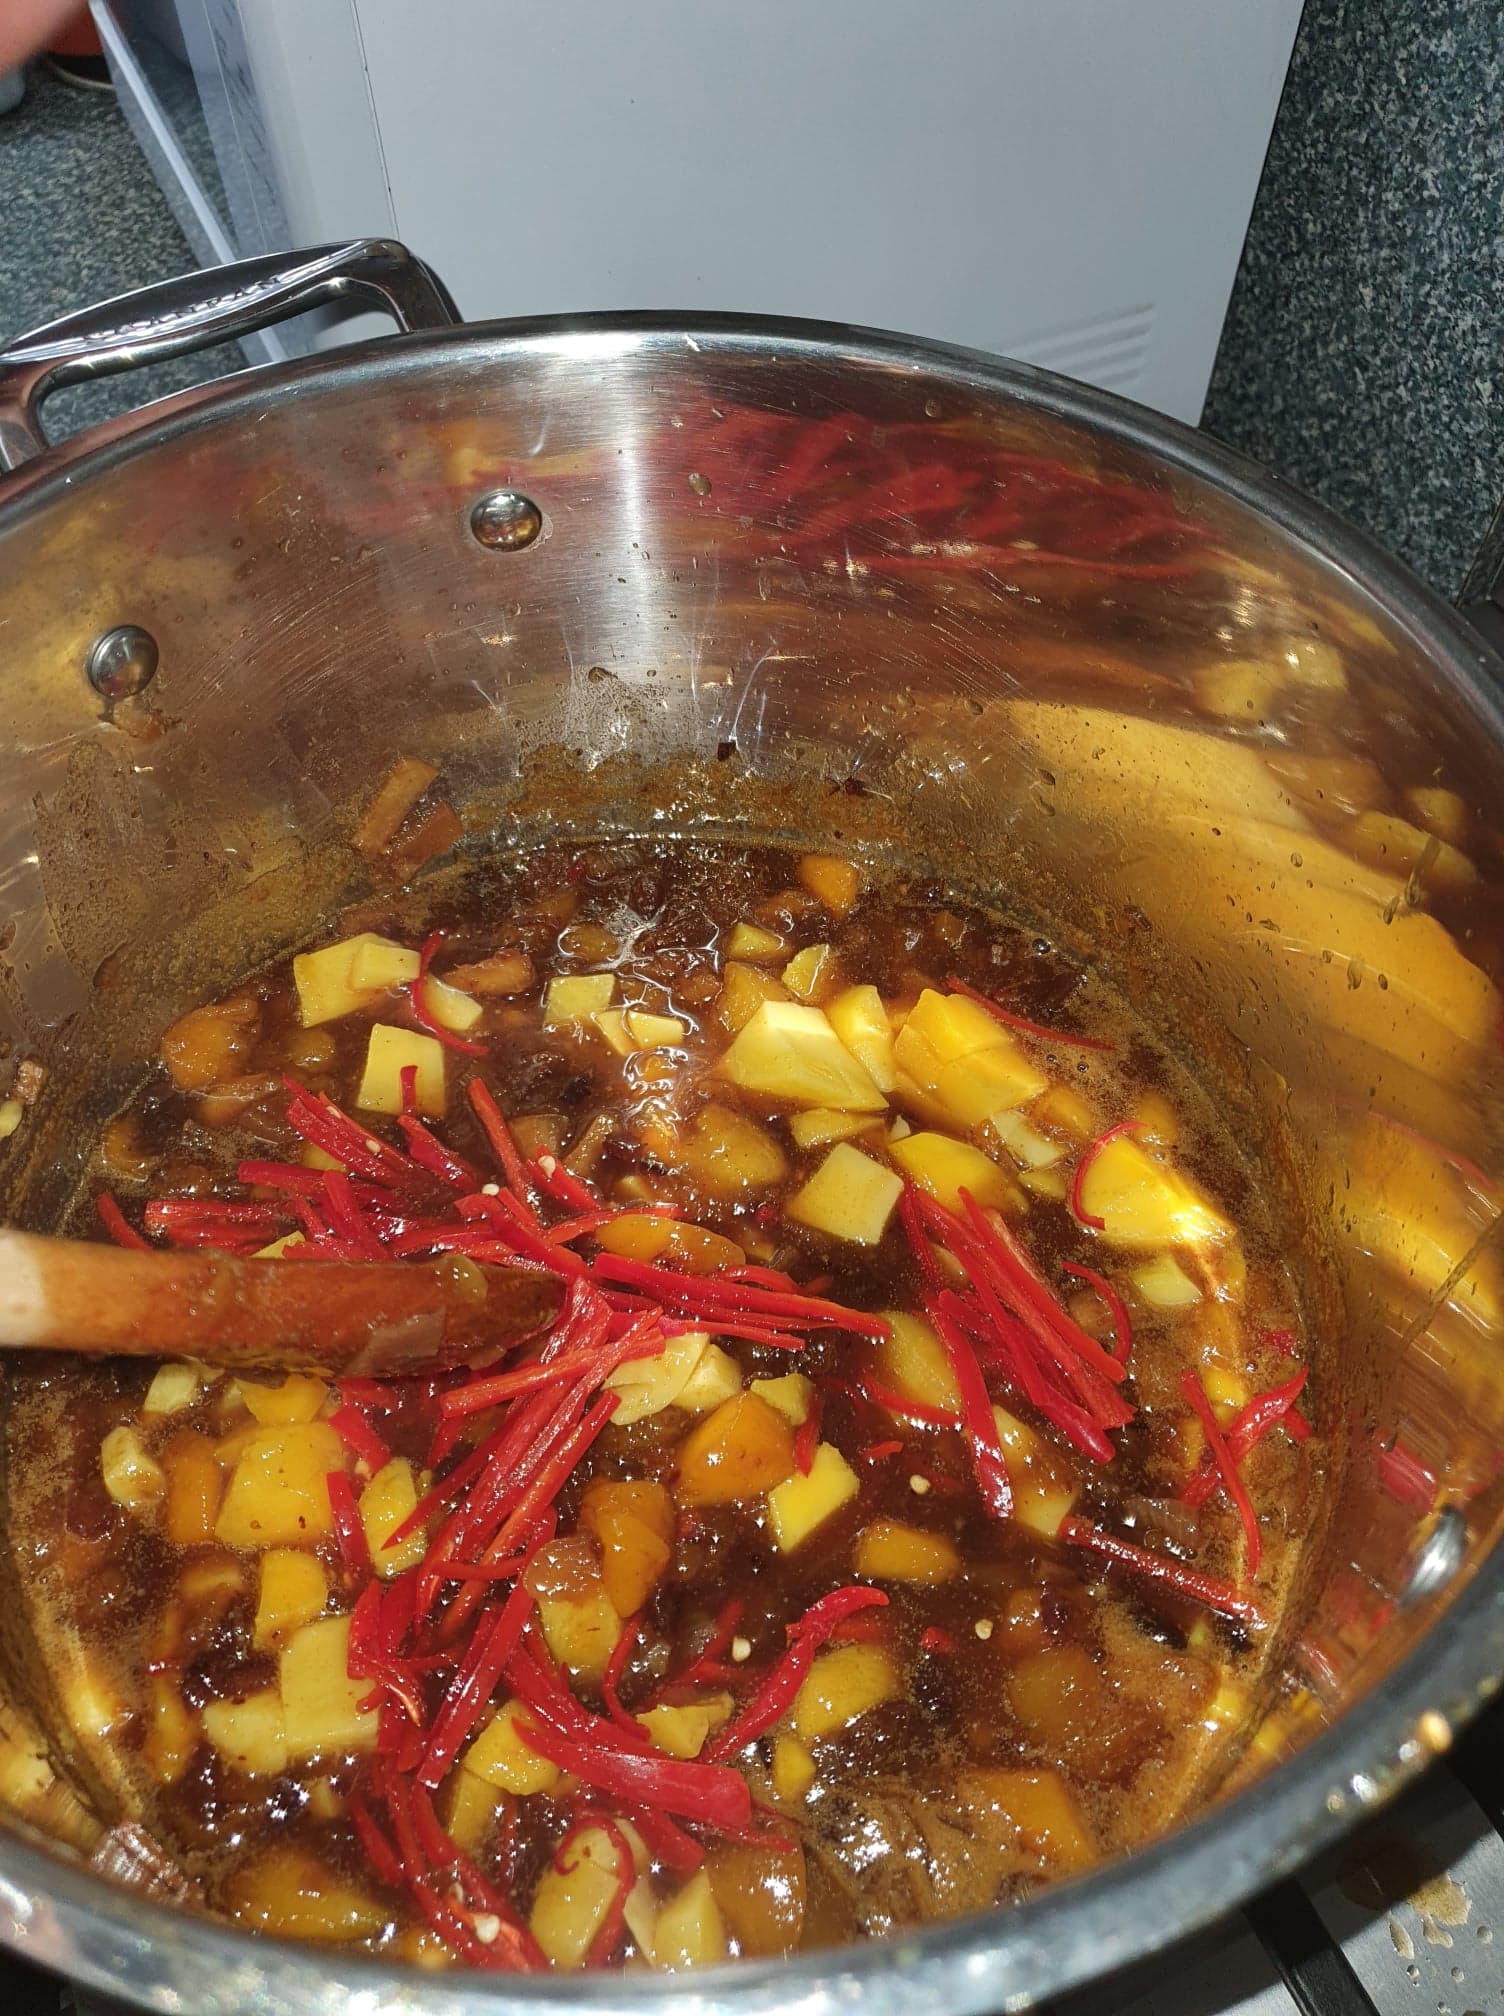 1 hour into cooking Spicy-Mango-Chutney